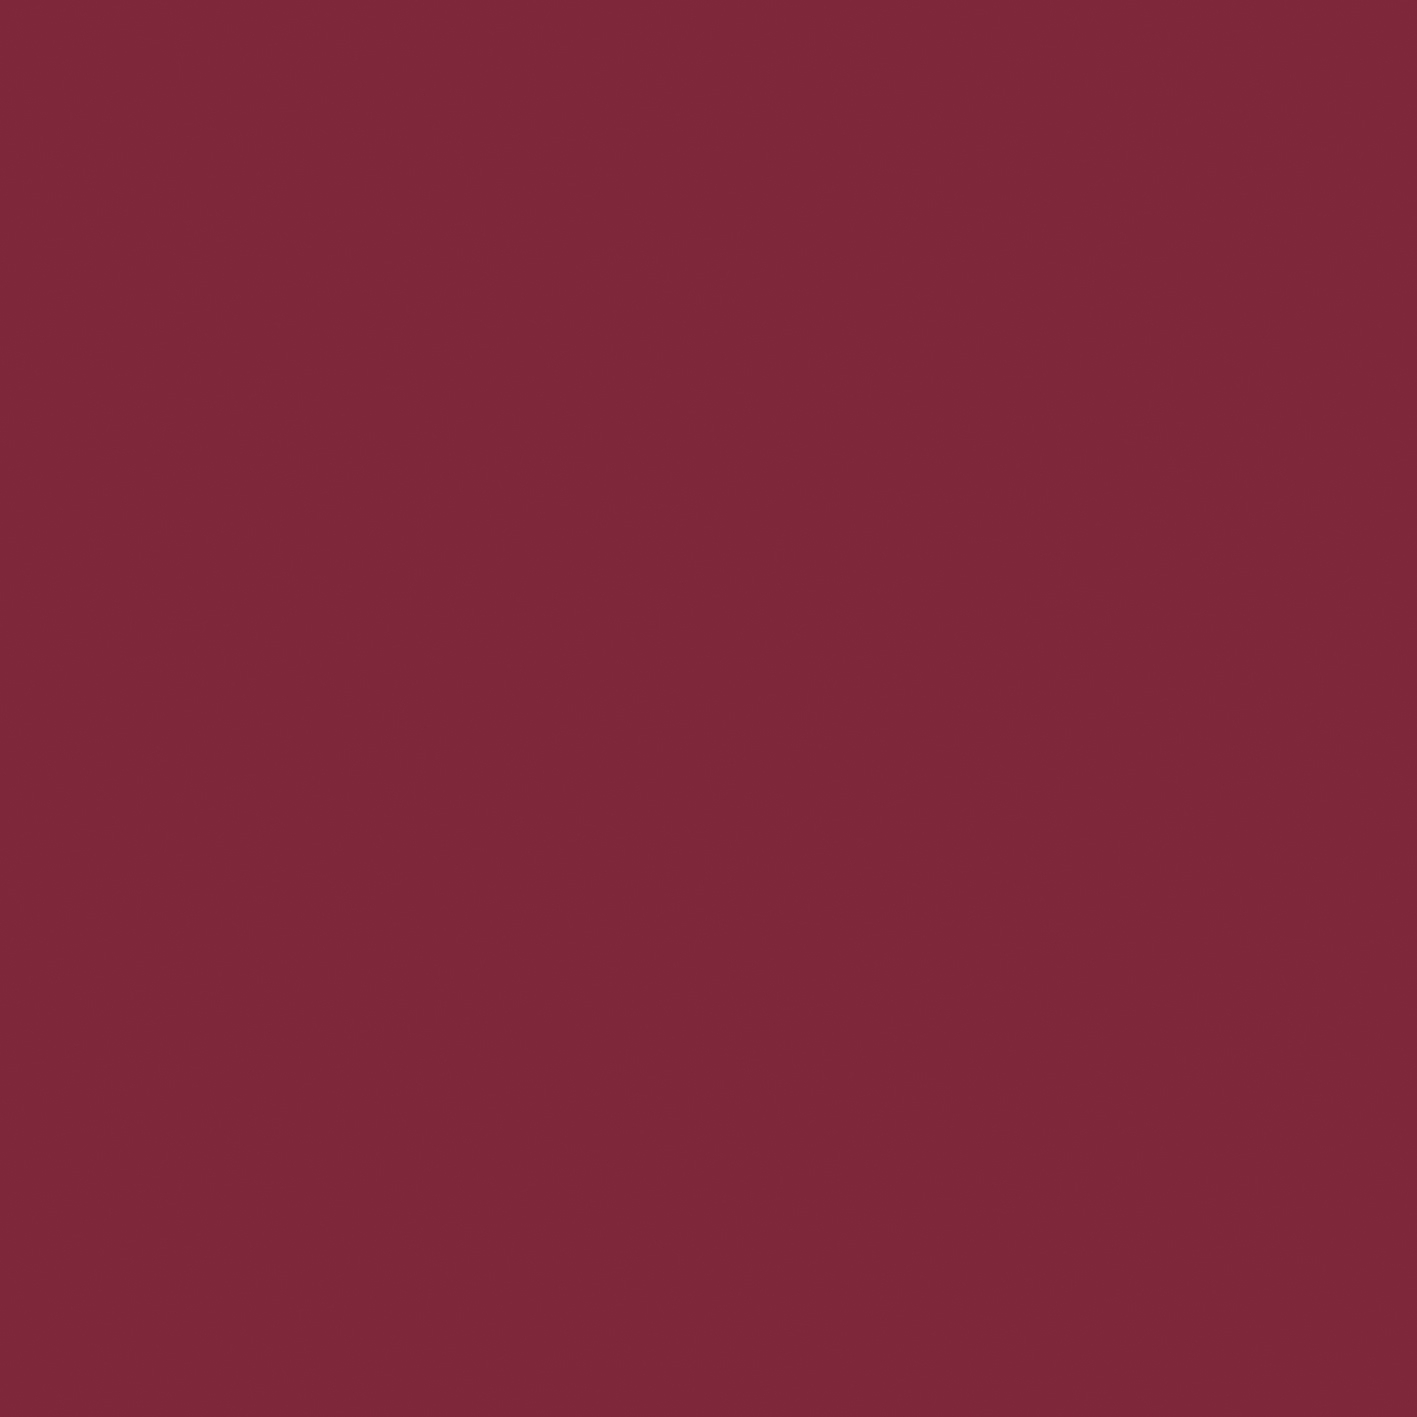 Buildtech 2.0 Bold Colors Burgundy Glossy 6mm 120 x 120